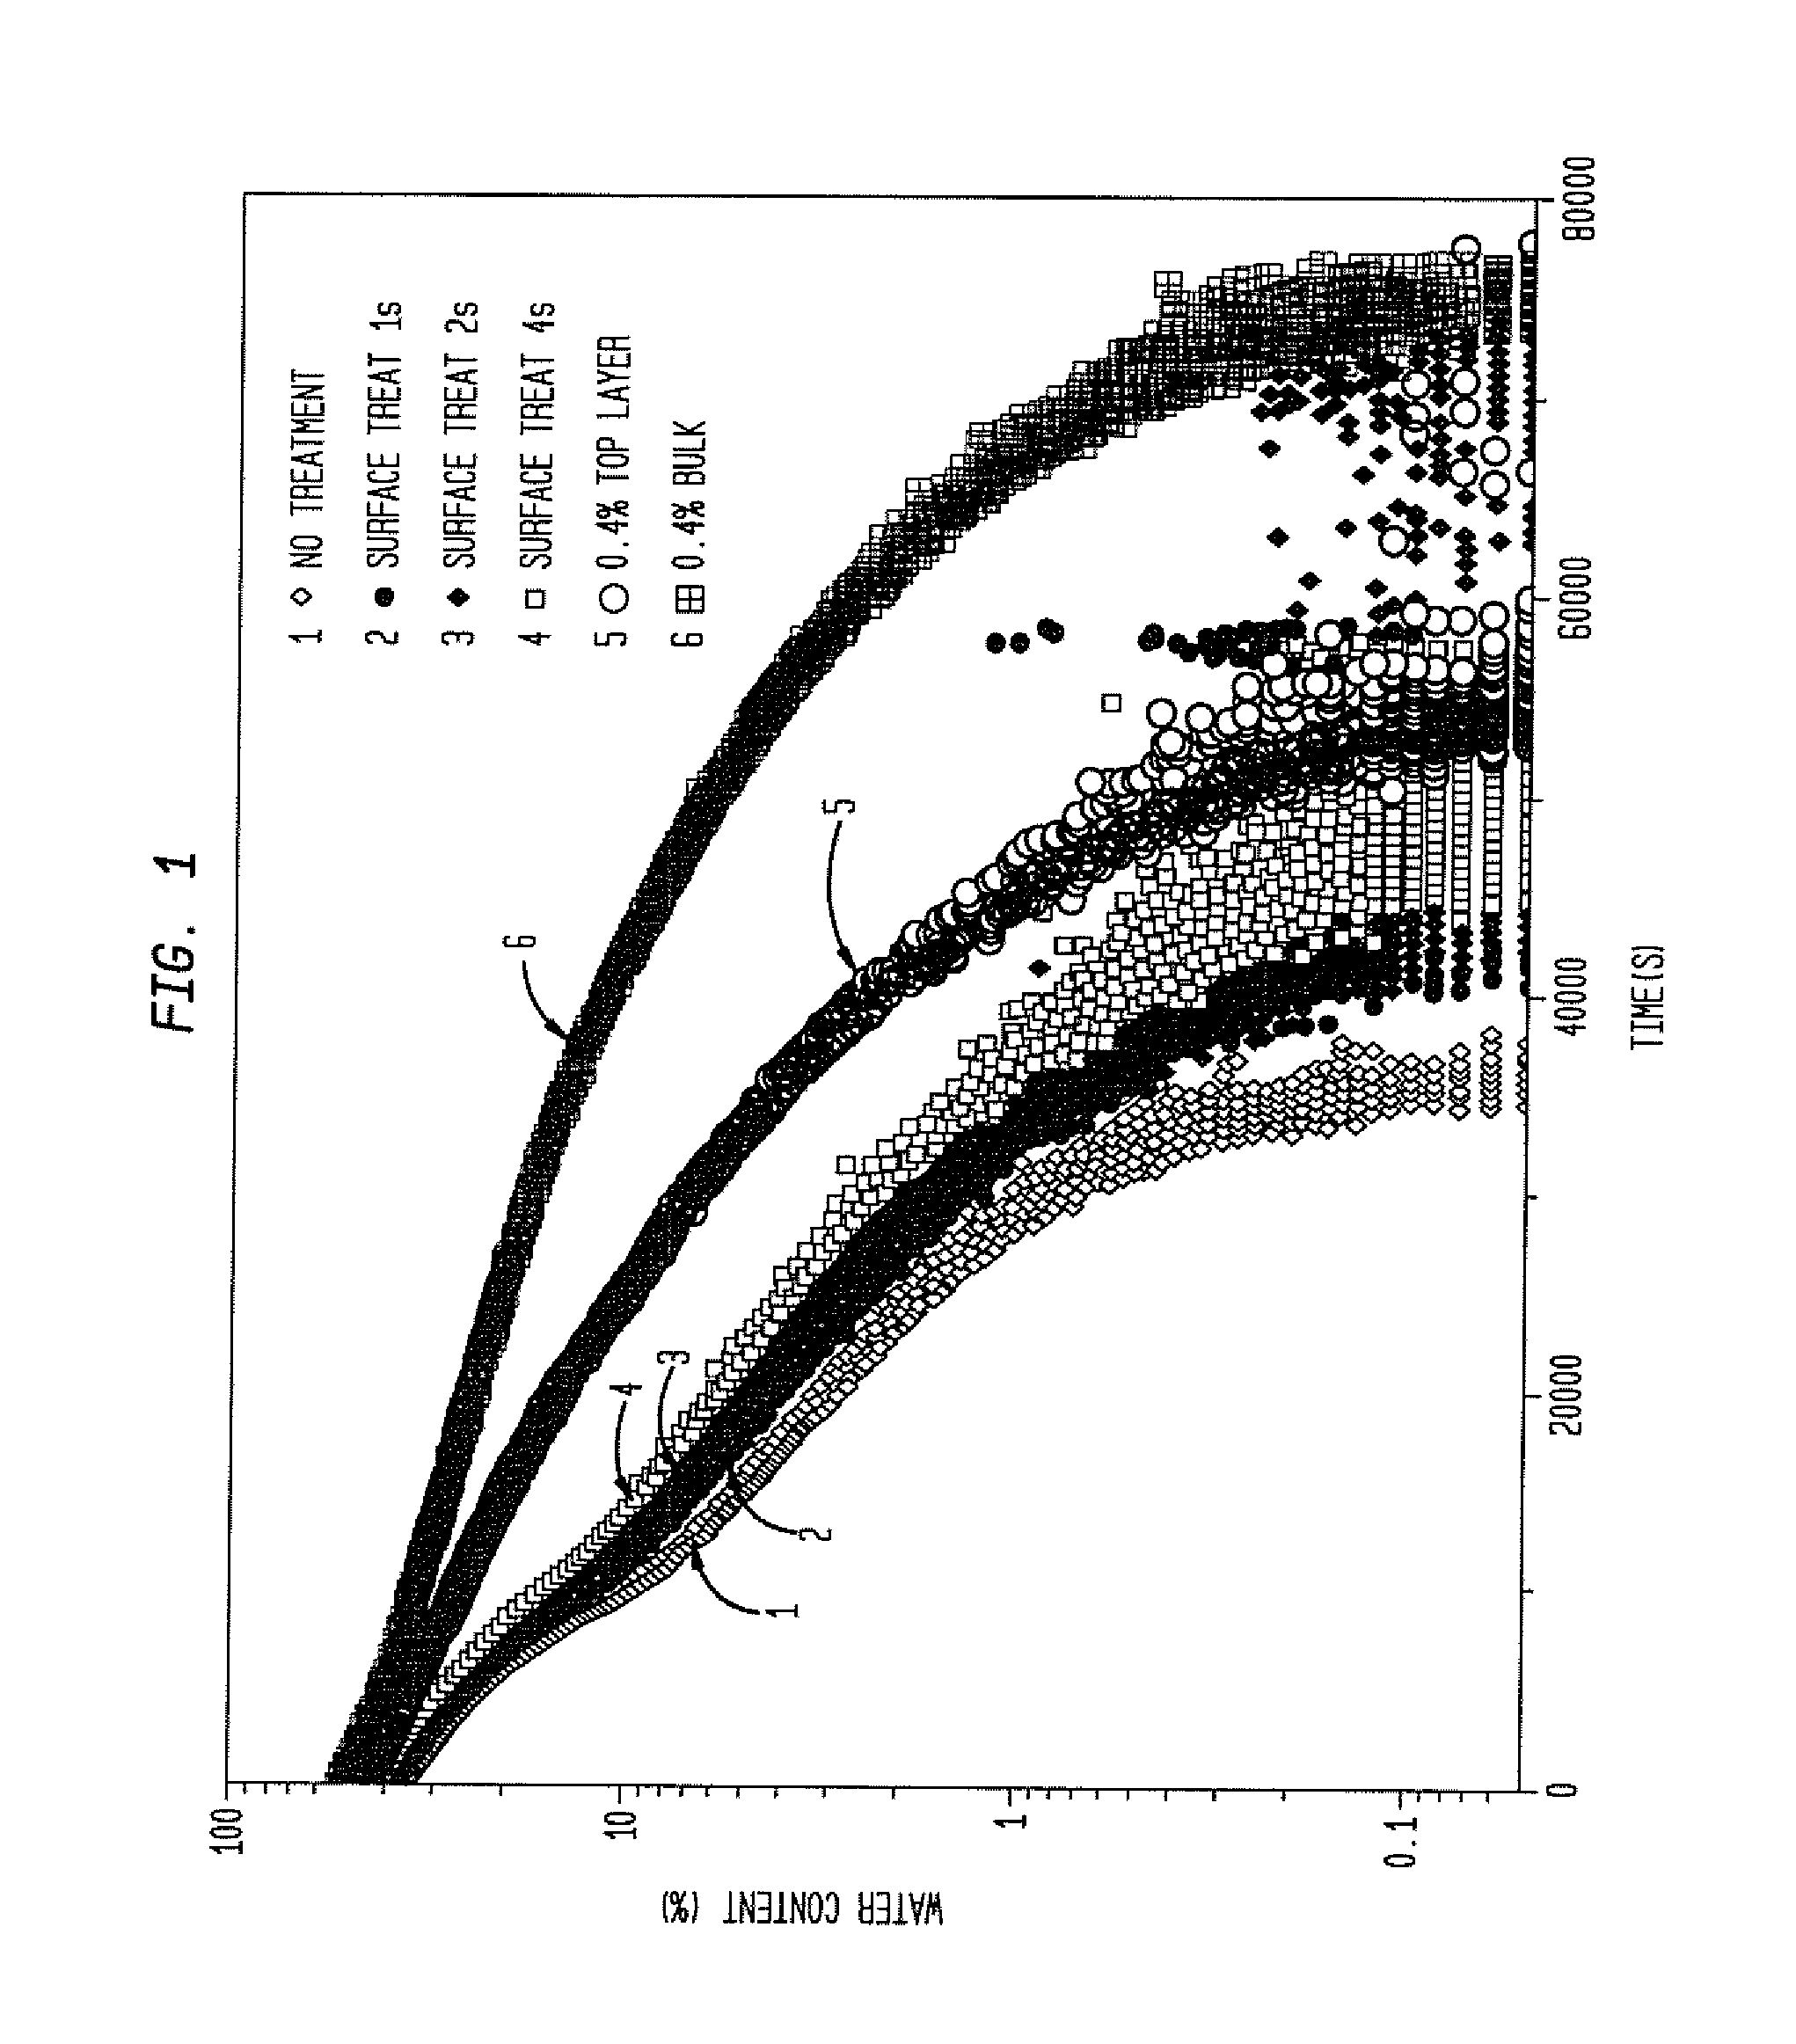 Soil Additives For Promoting Seed Germination, For Prevention of Evaporation and Methods for Use